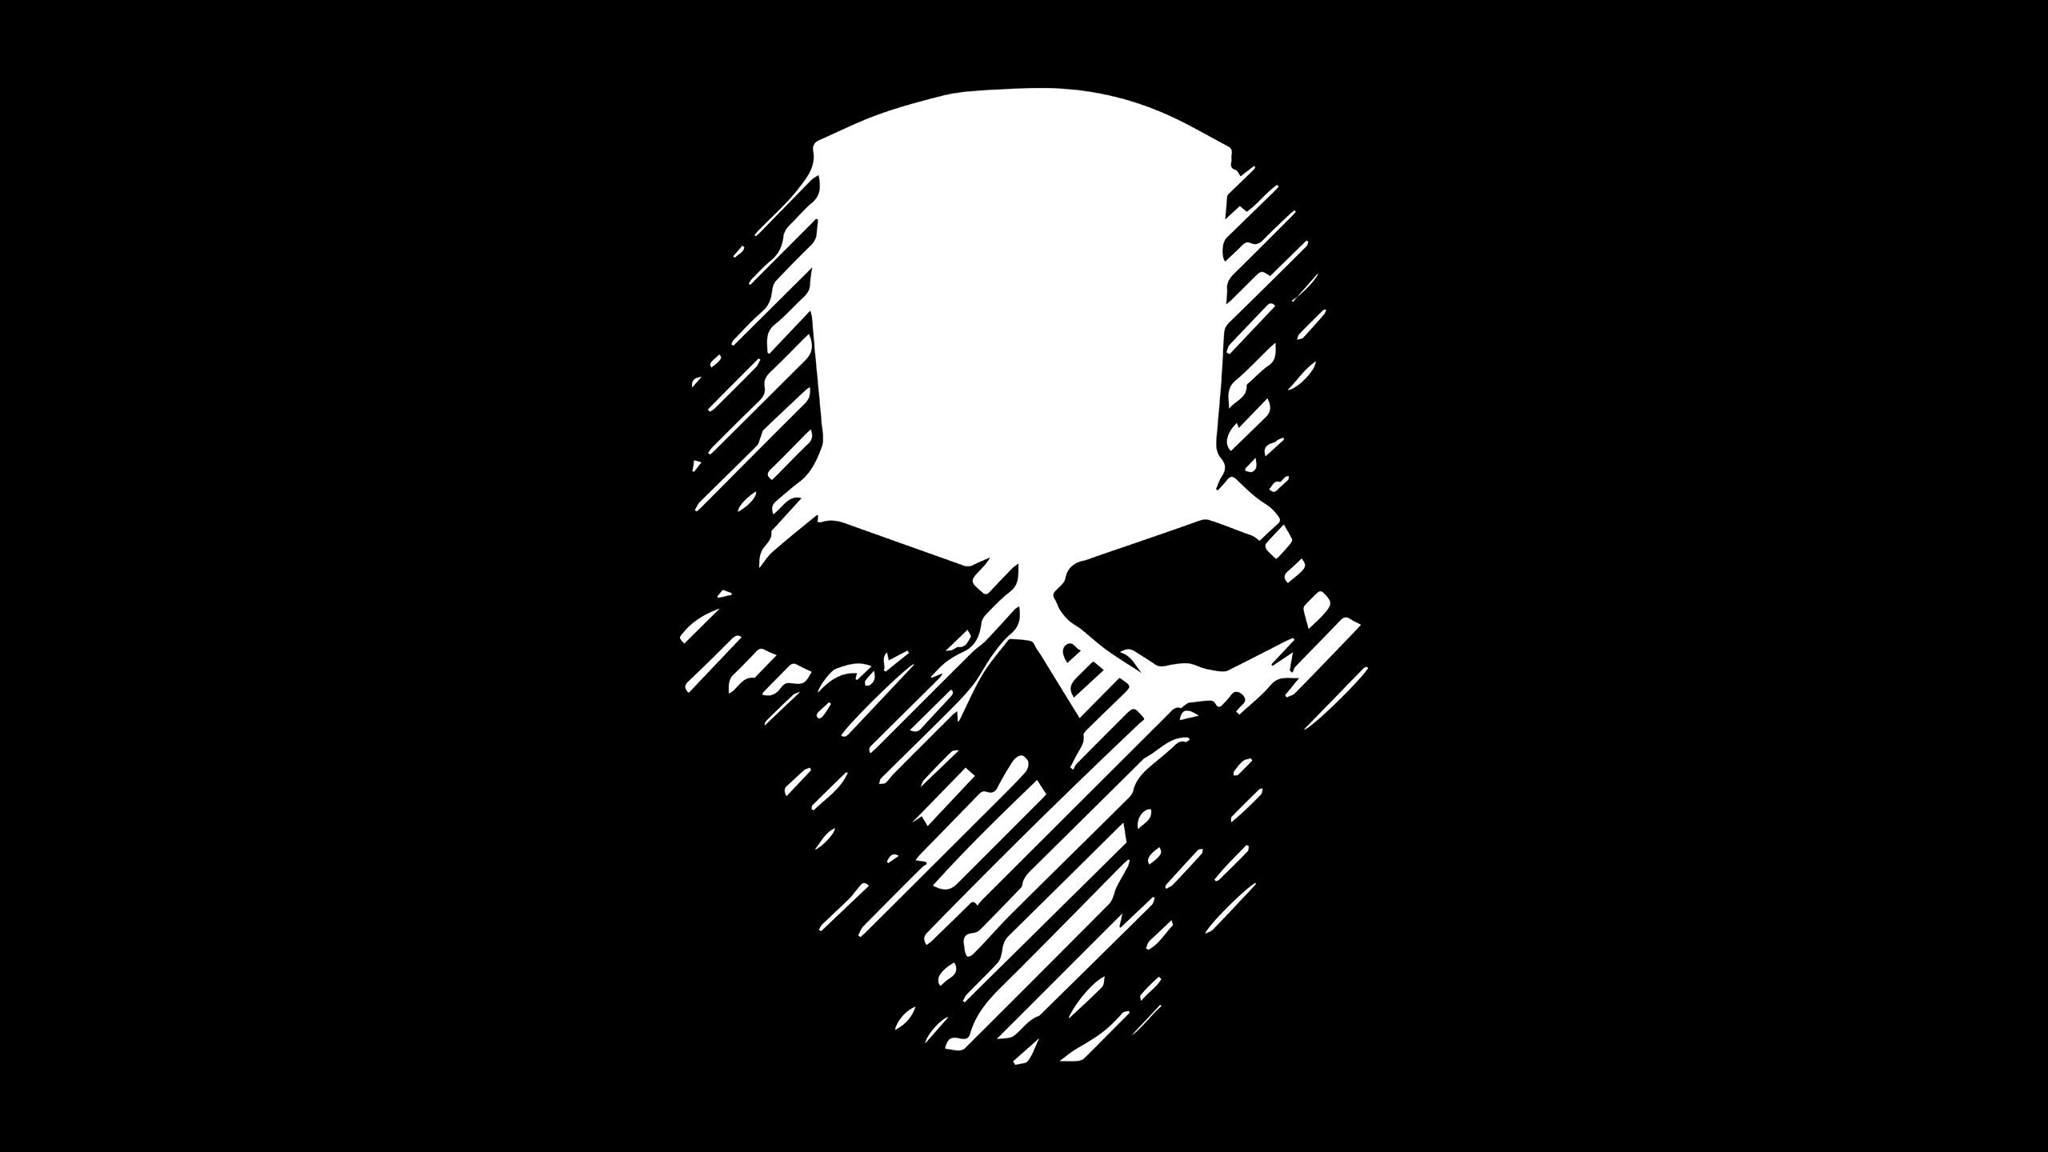 Tom Clancys Ghost Recon Military Minimalism Simple Background Skull Black Background 2048x1152